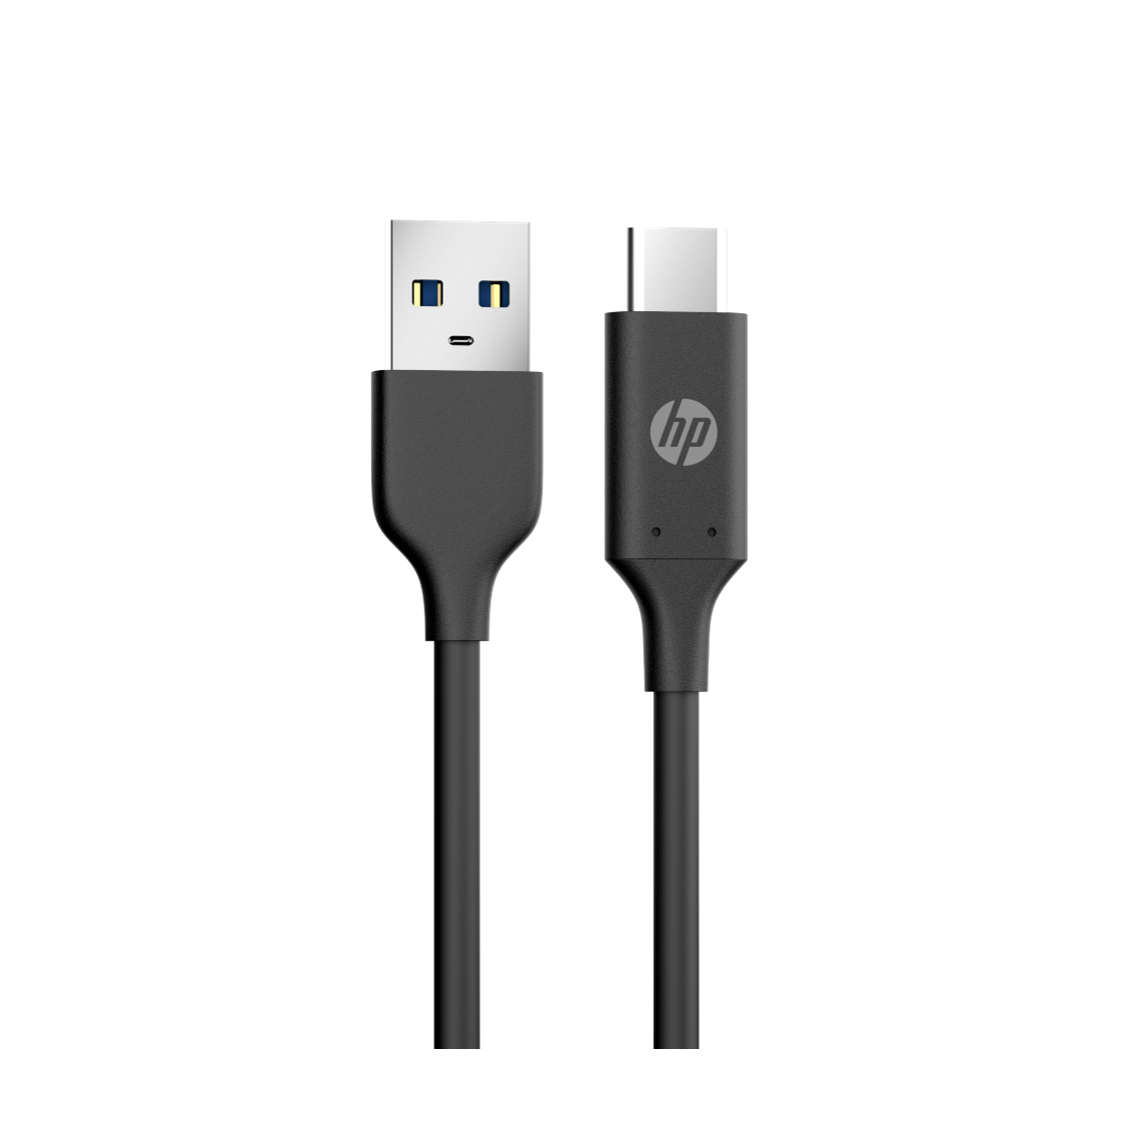 HP惠普USB3.1 A to C数据线DHC-TC101